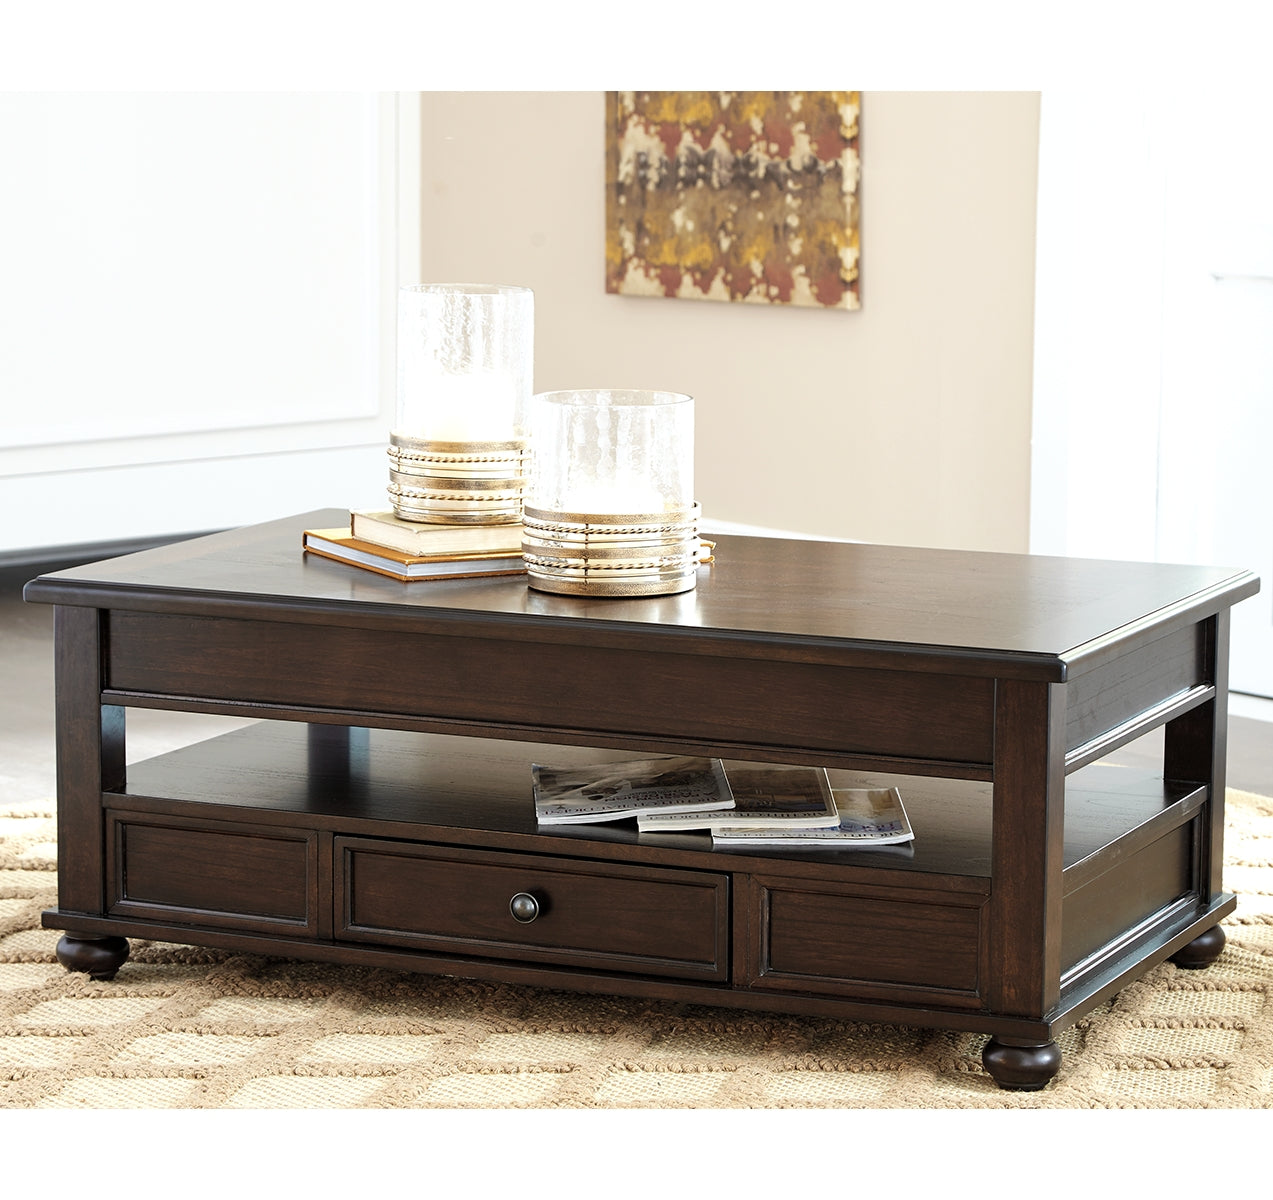 Barilanni Coffee Table with 2 End Tables